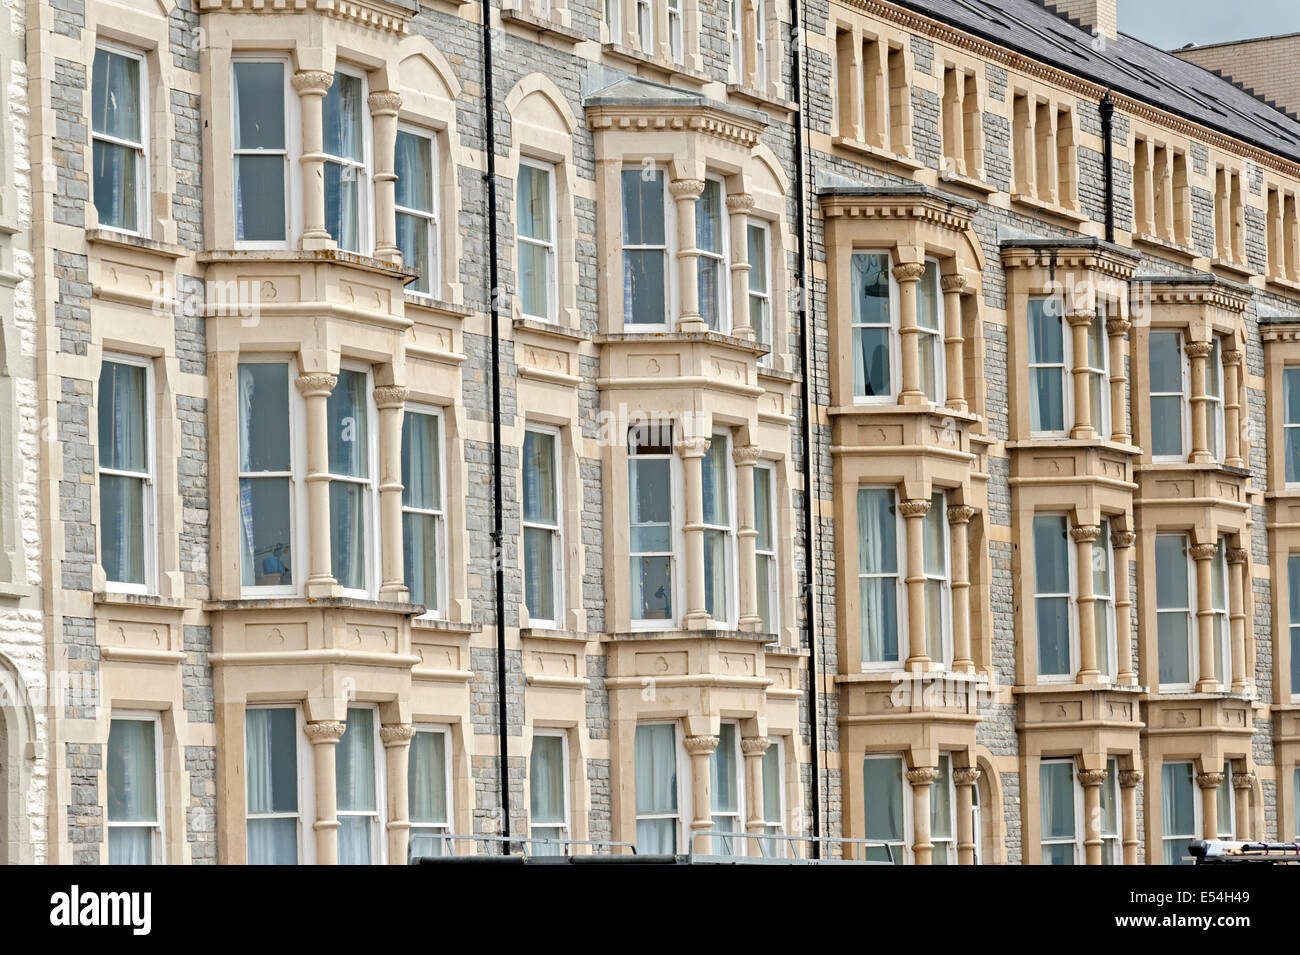 aberystwyth wales bed and breakfast and hotel facade in the promenade close ups of the architecture Stock Photo